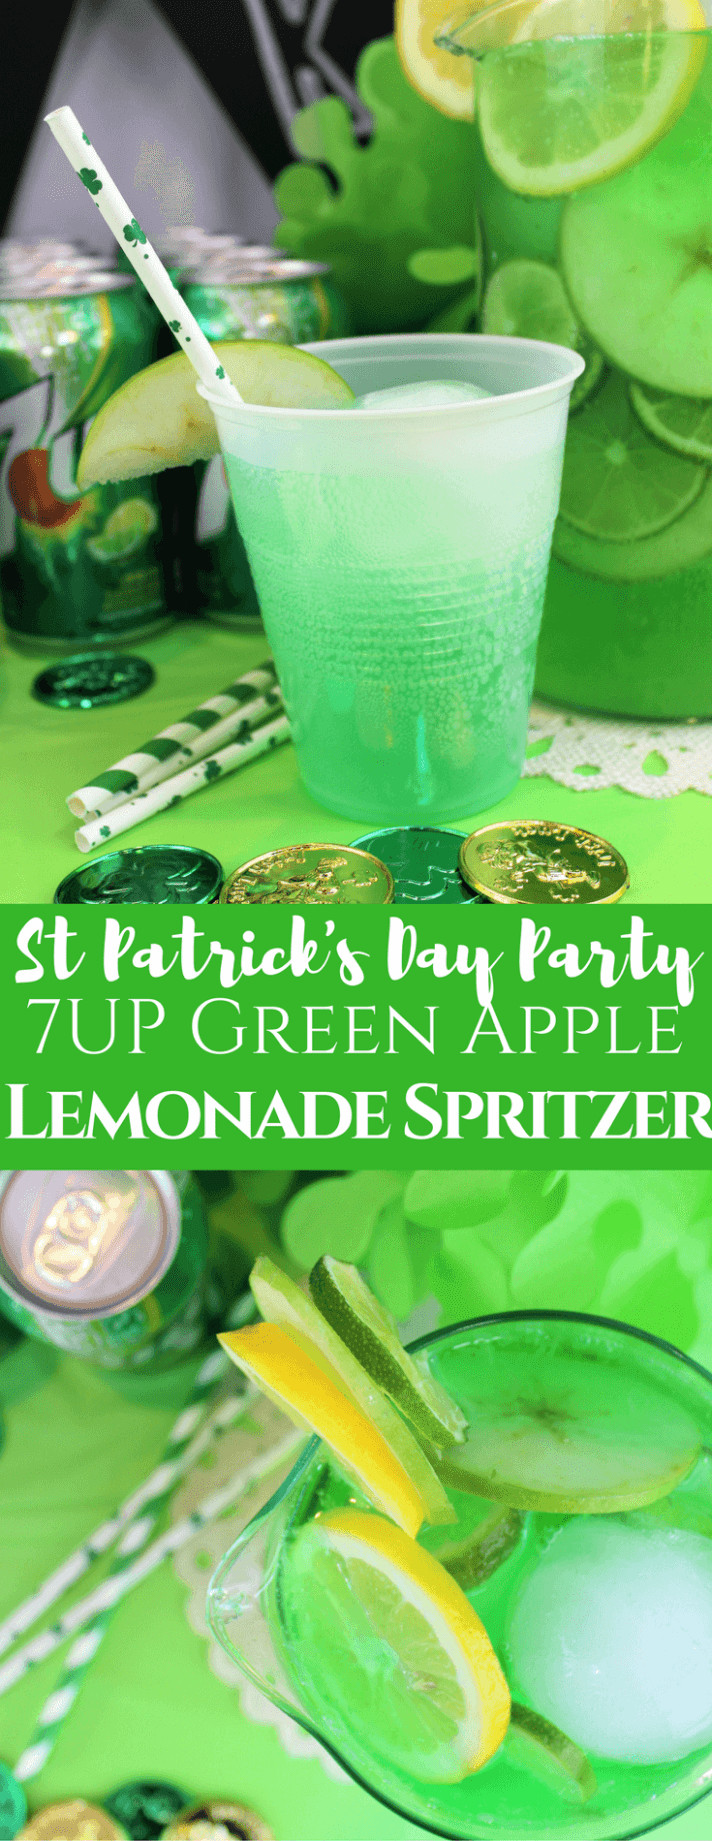 St Patrick's Day Drink Ideas
 70 St Patrick s Day Food & Drink Ideas This Tiny Blue